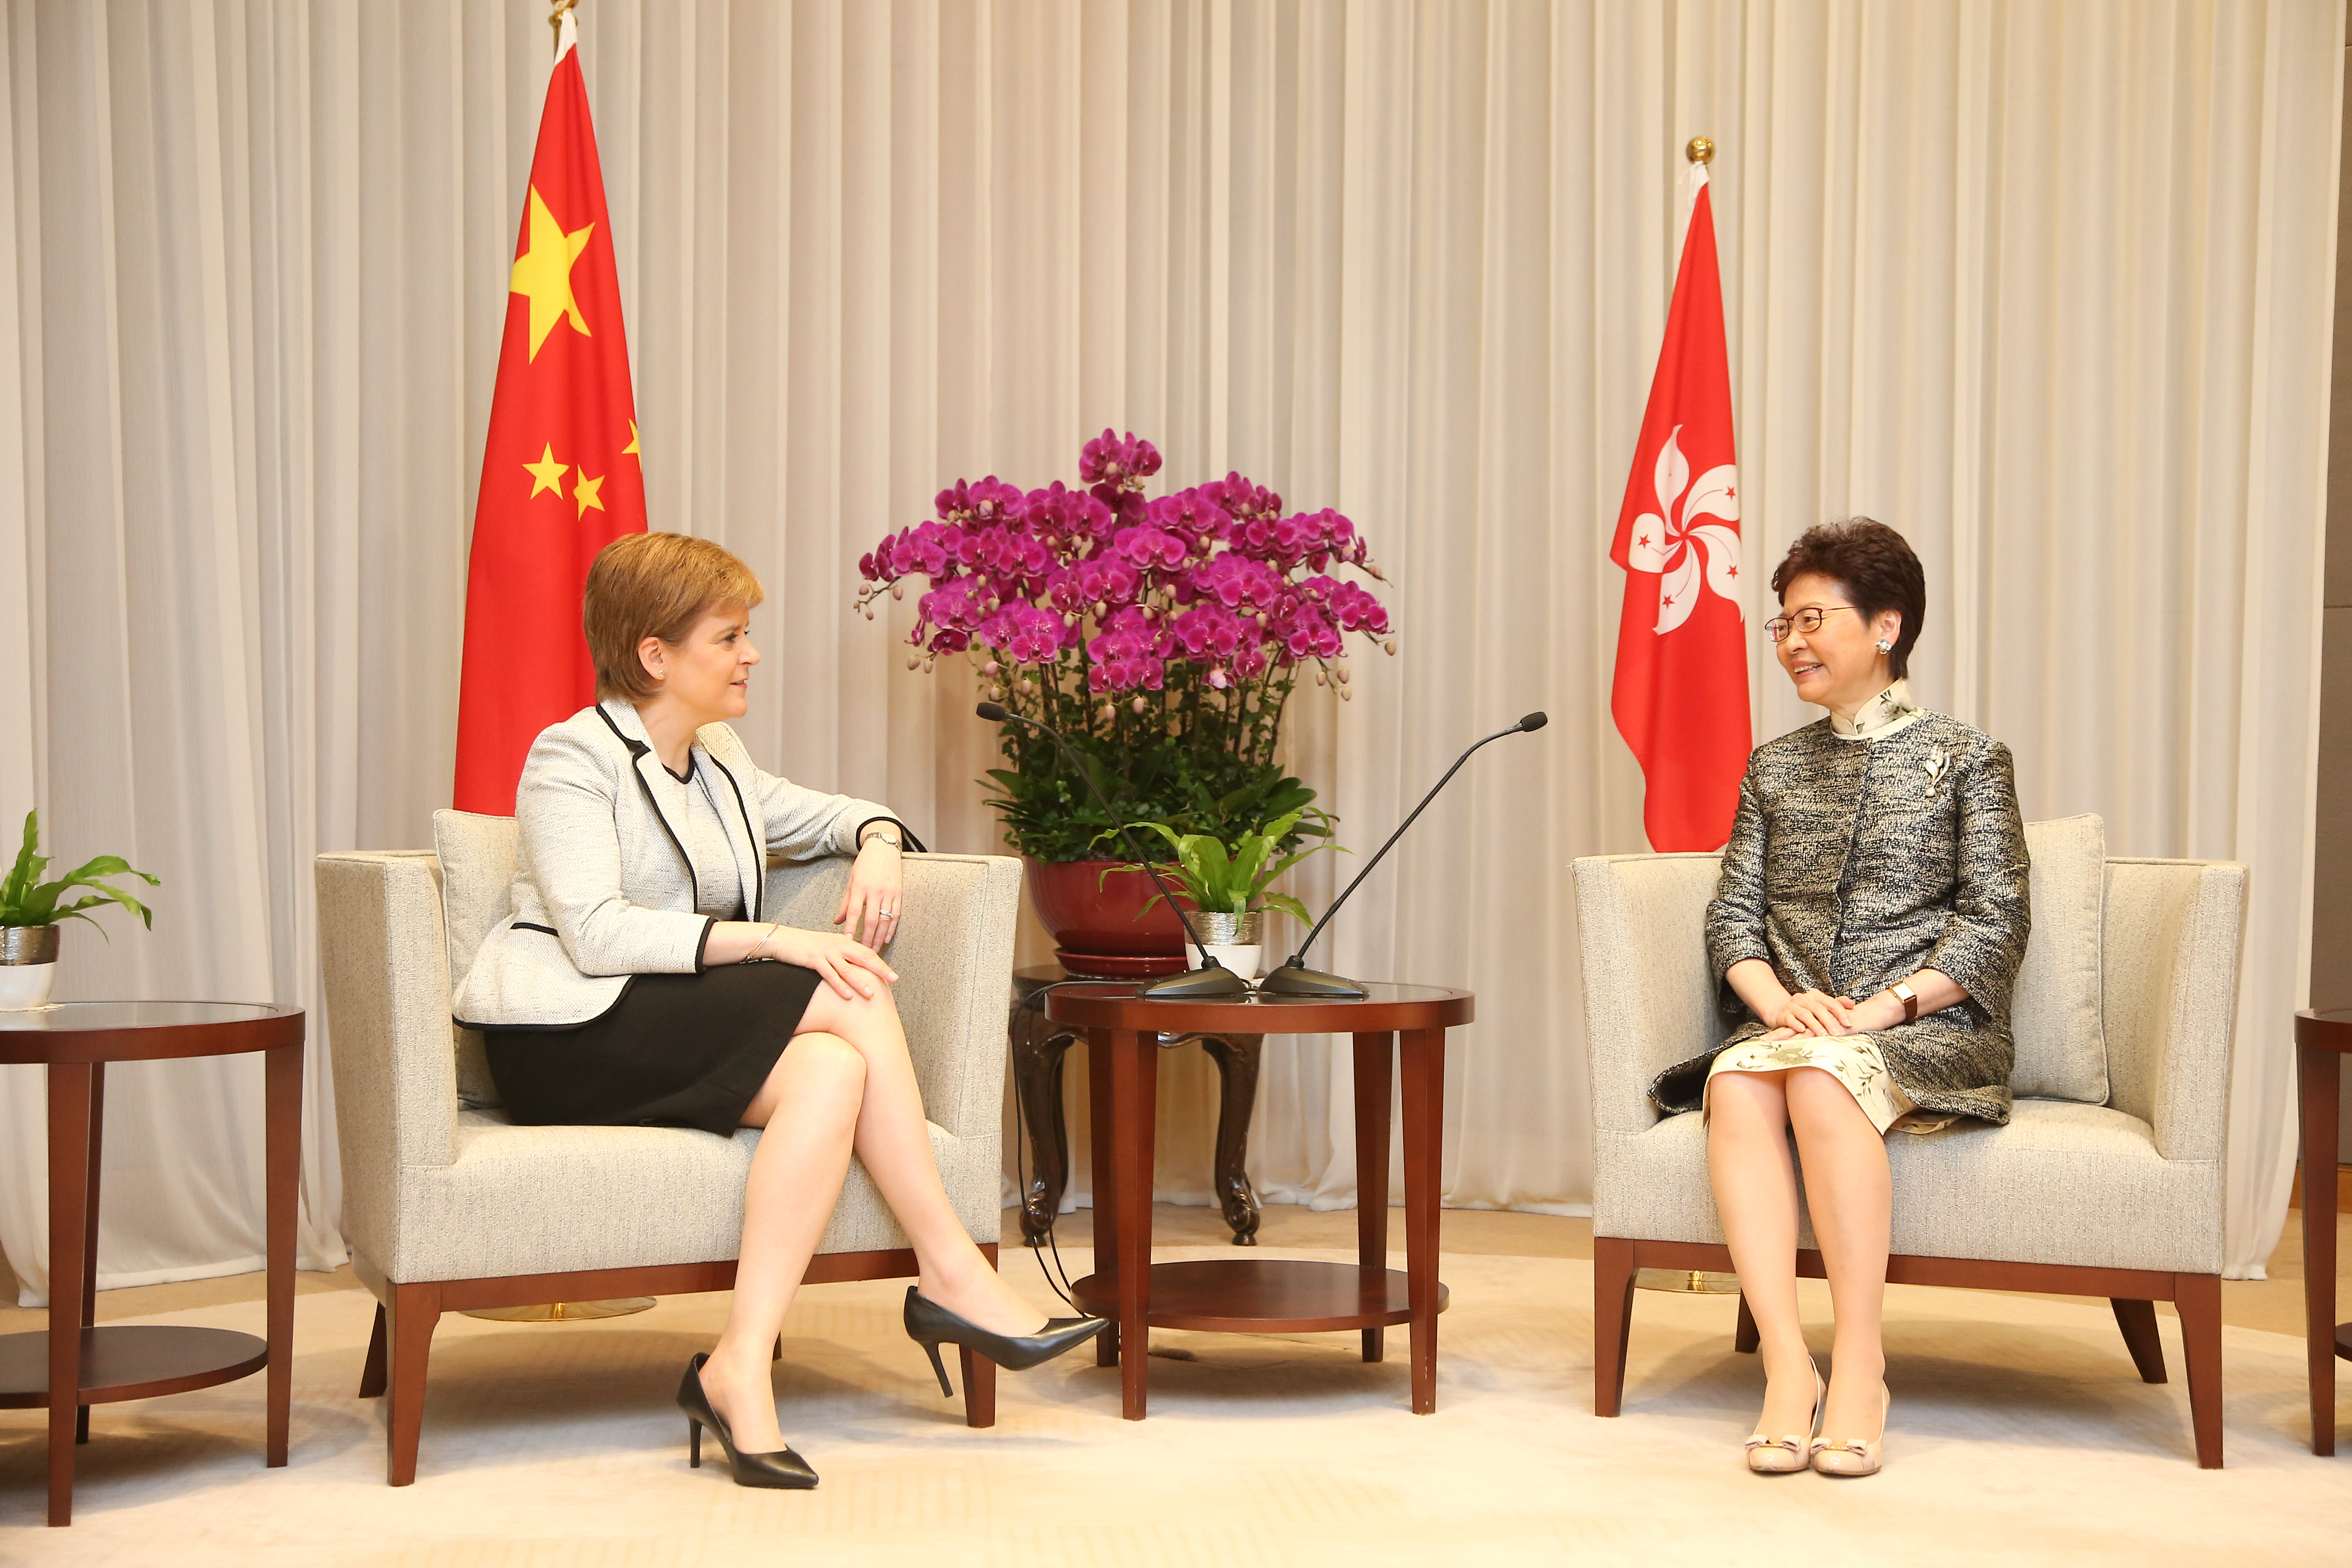 Chief Executive Carrie Lam of Hong Kong (photo credit: First Minister of Scotland/flickr)